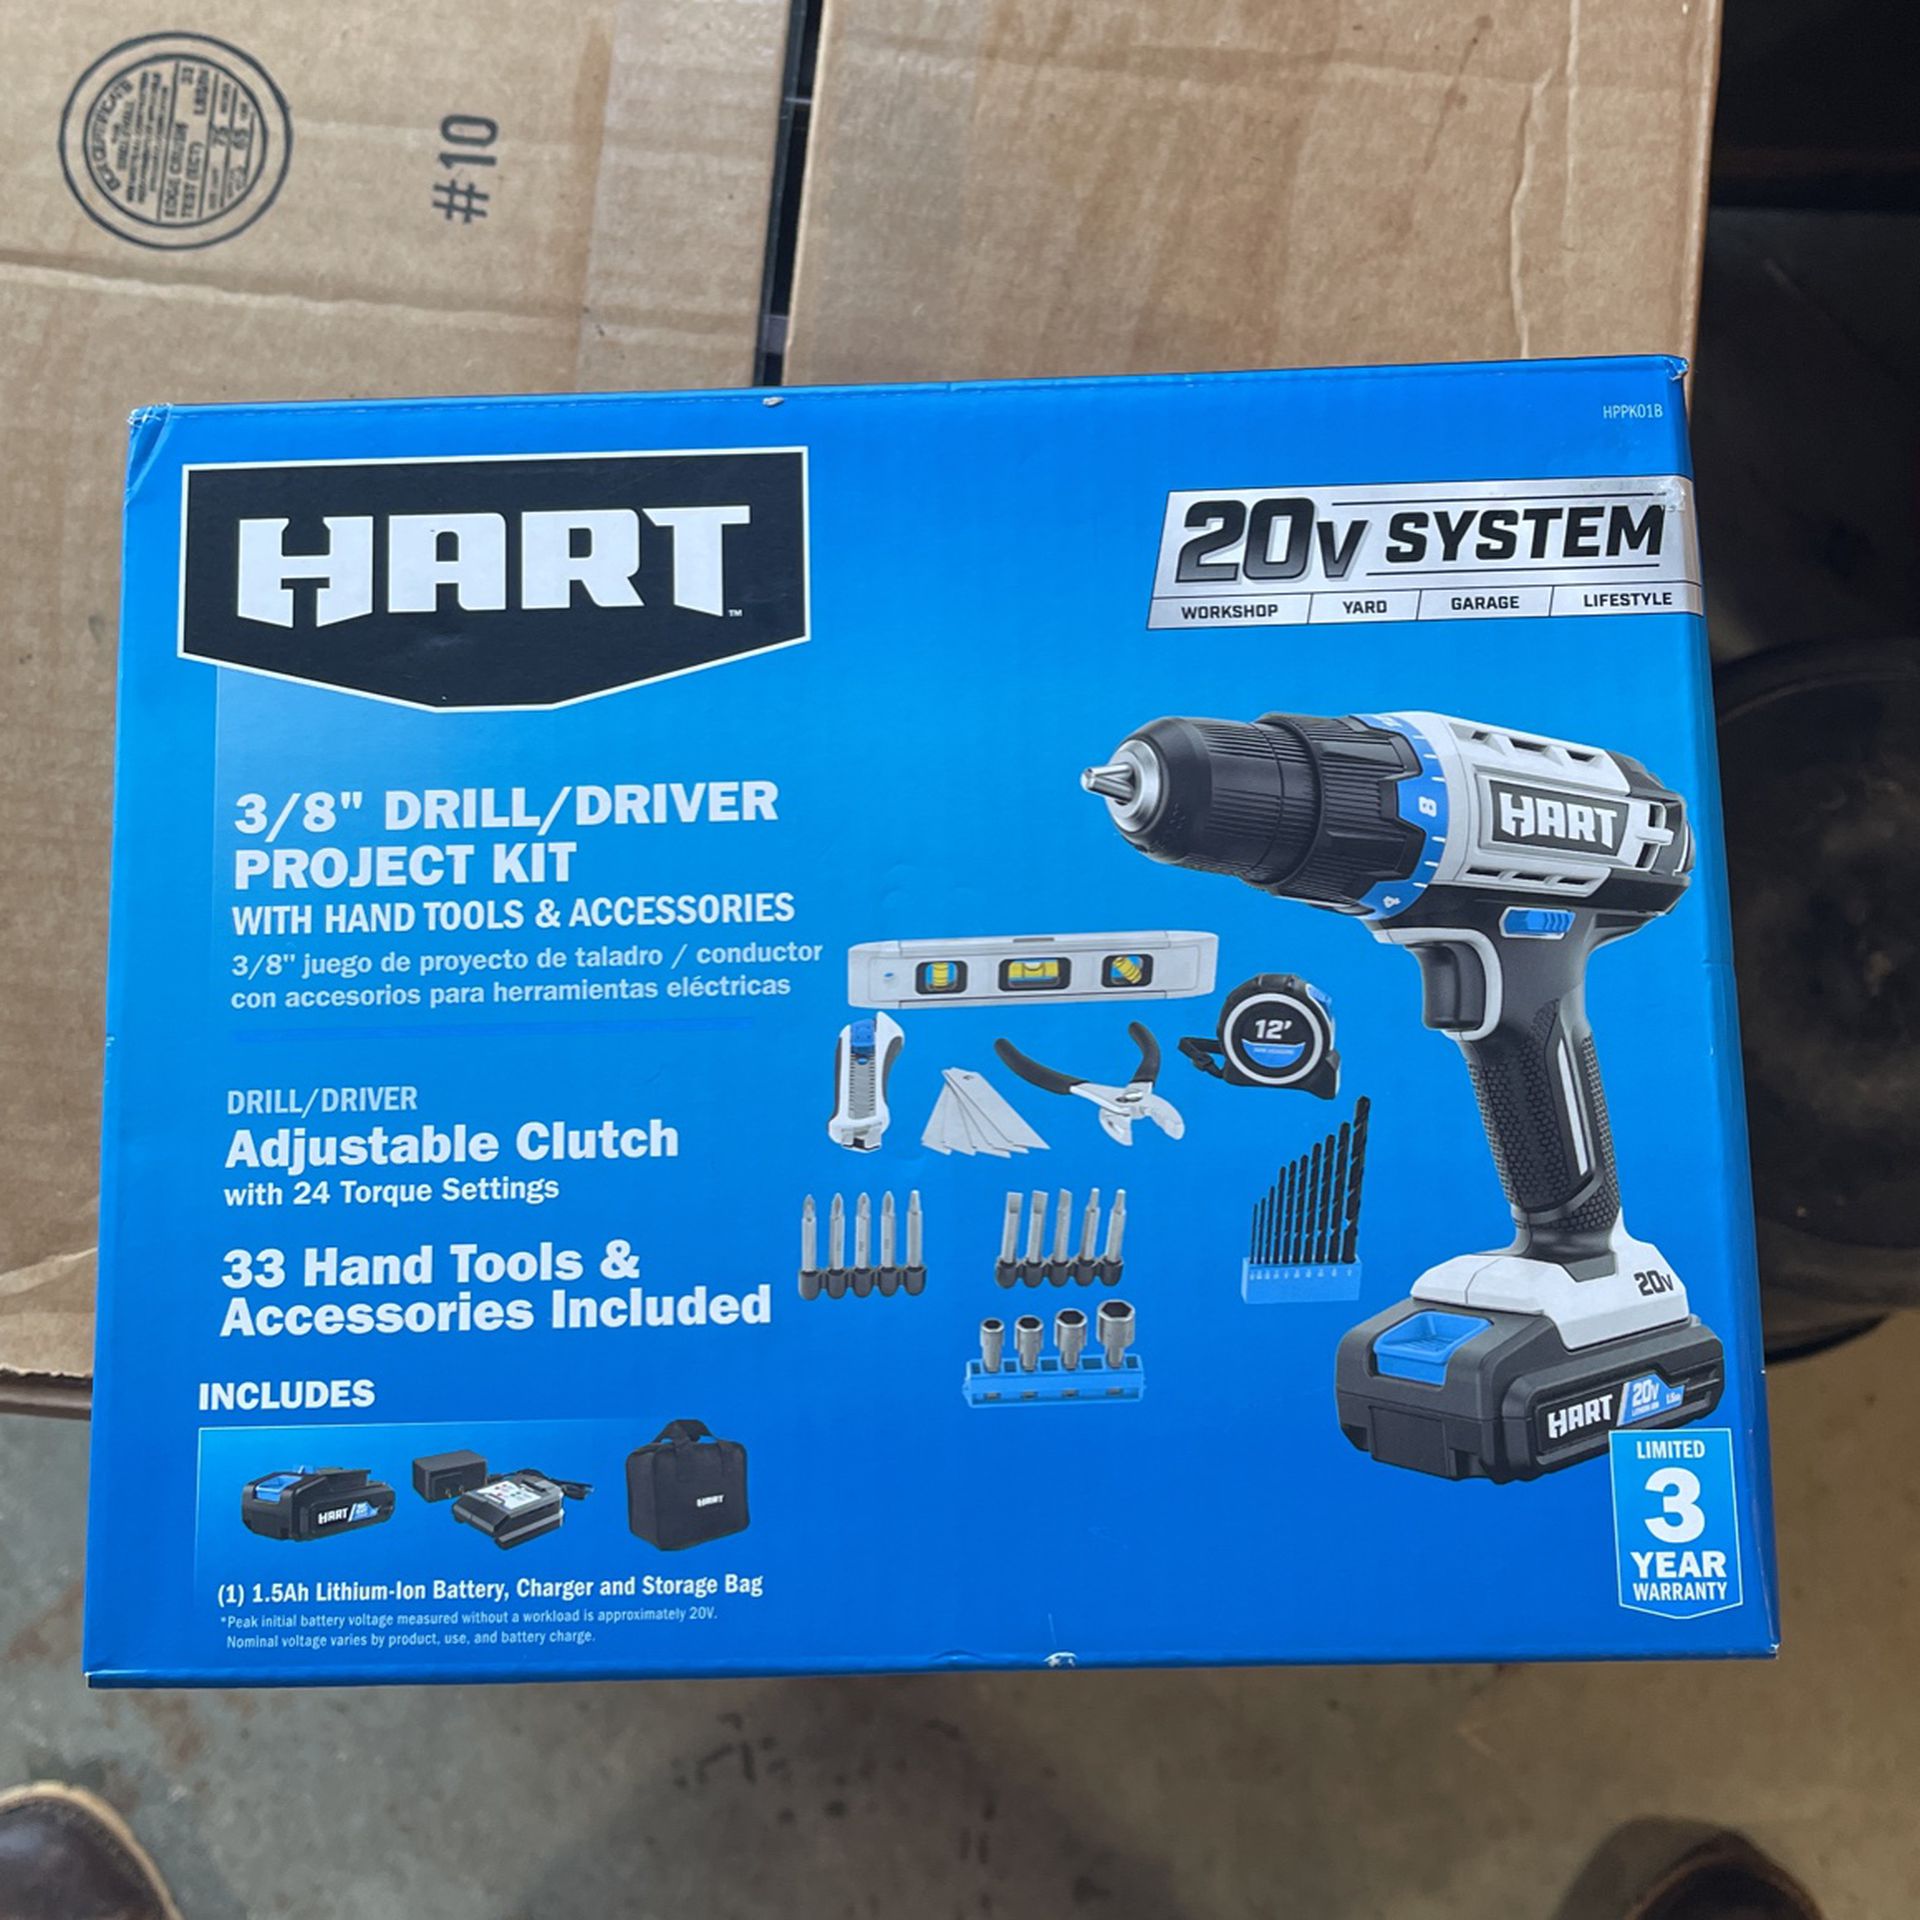 Hart 20V System 3/8” Drill driver set and Accesories